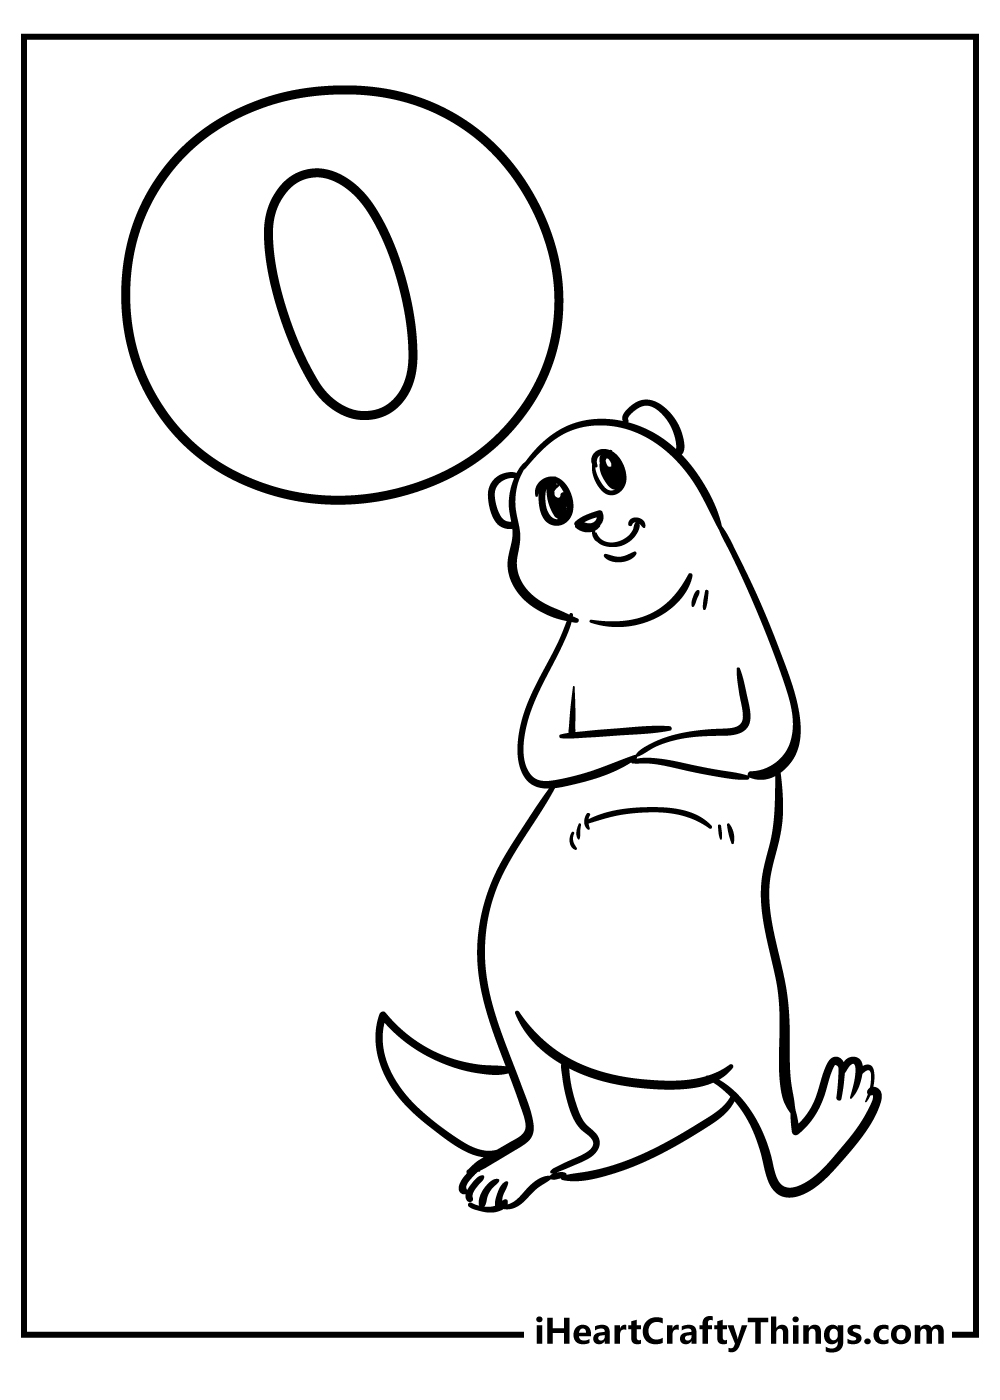 Letter o coloring pages free printables